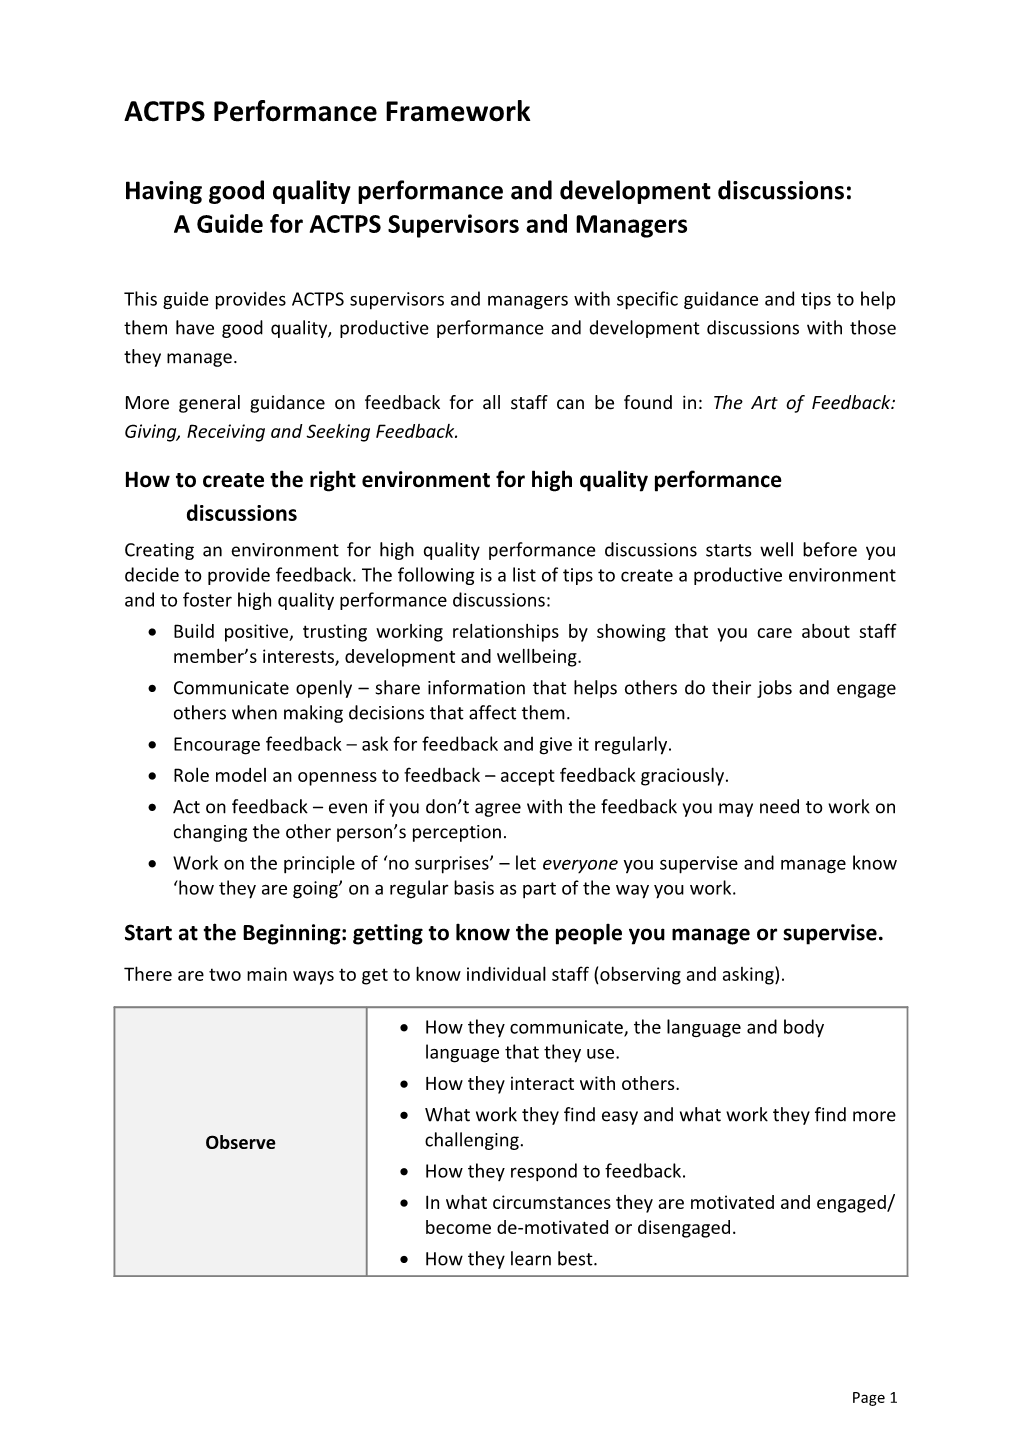 Having Good Quality Performance and Development Discussions: a Guide for ACTPS Supervisors